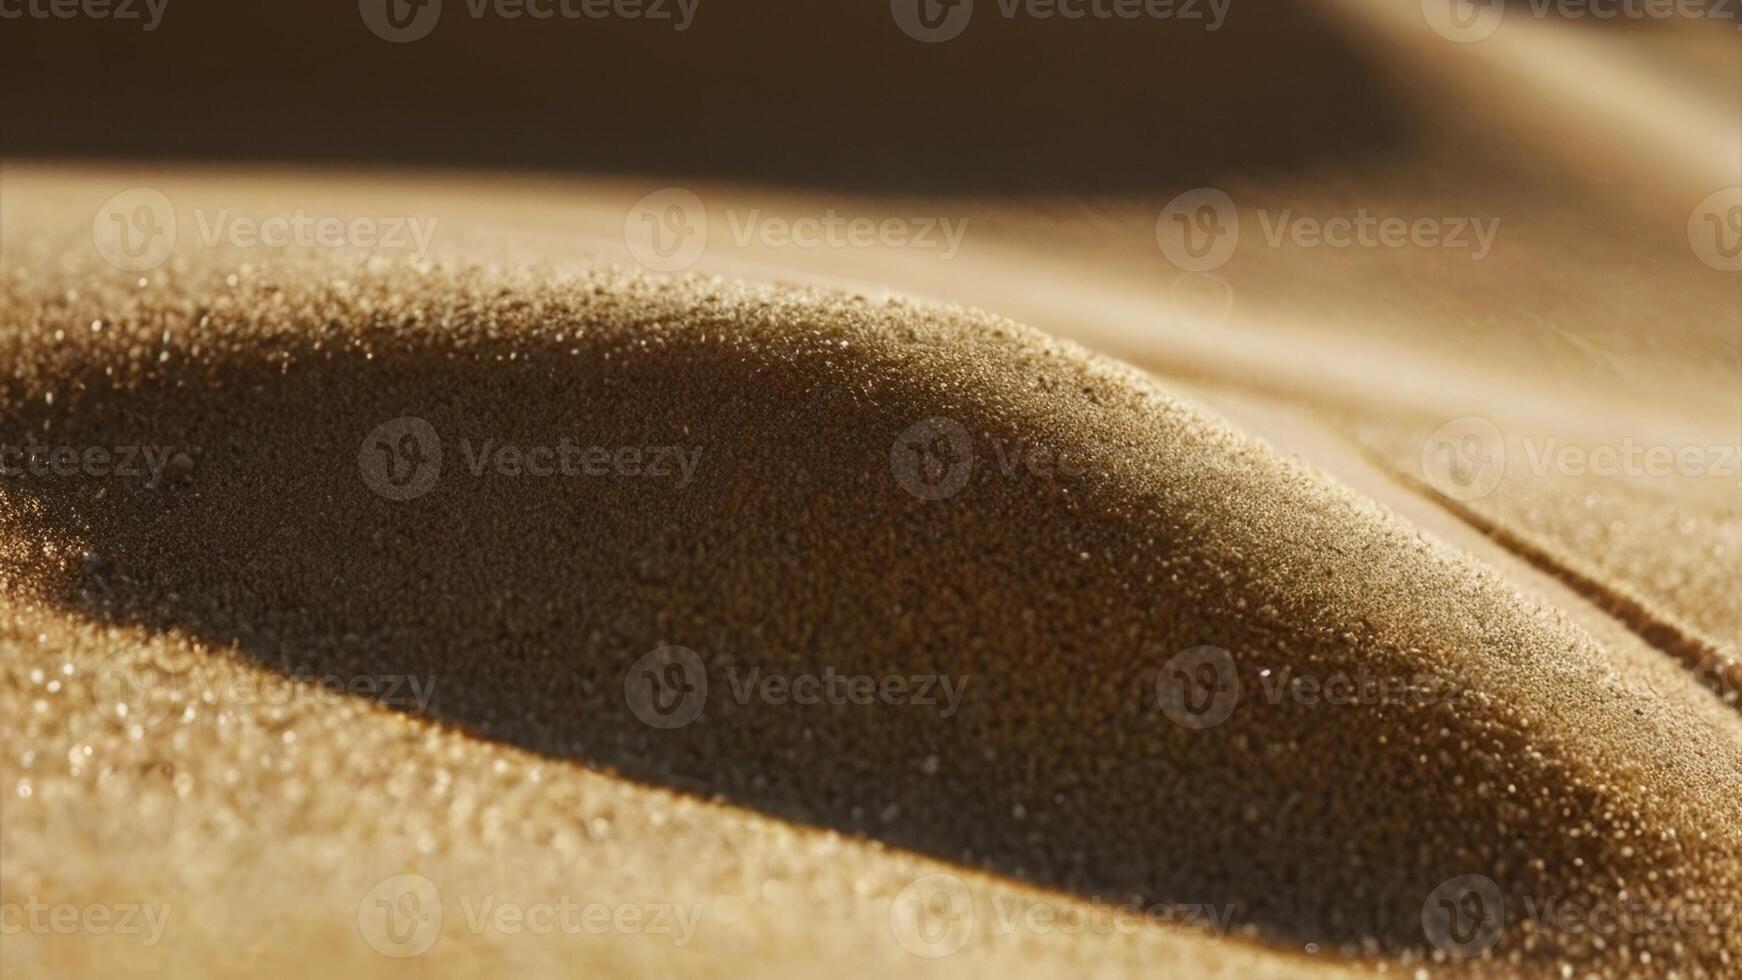 a close up of a sand dune of the desert photo